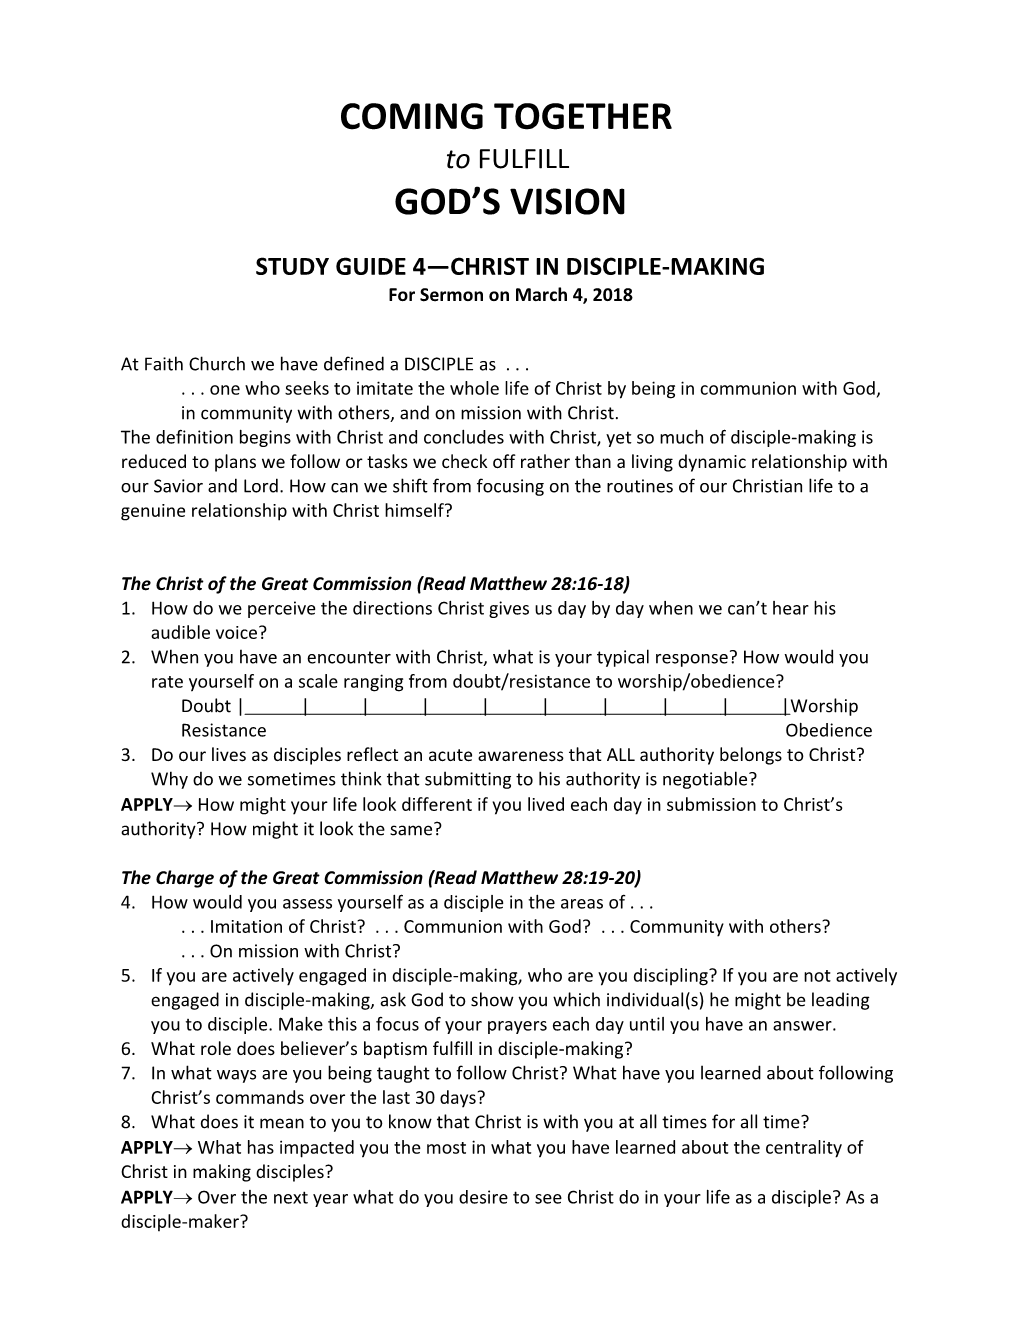 Study Guide 4 Christ in Disciple-Making